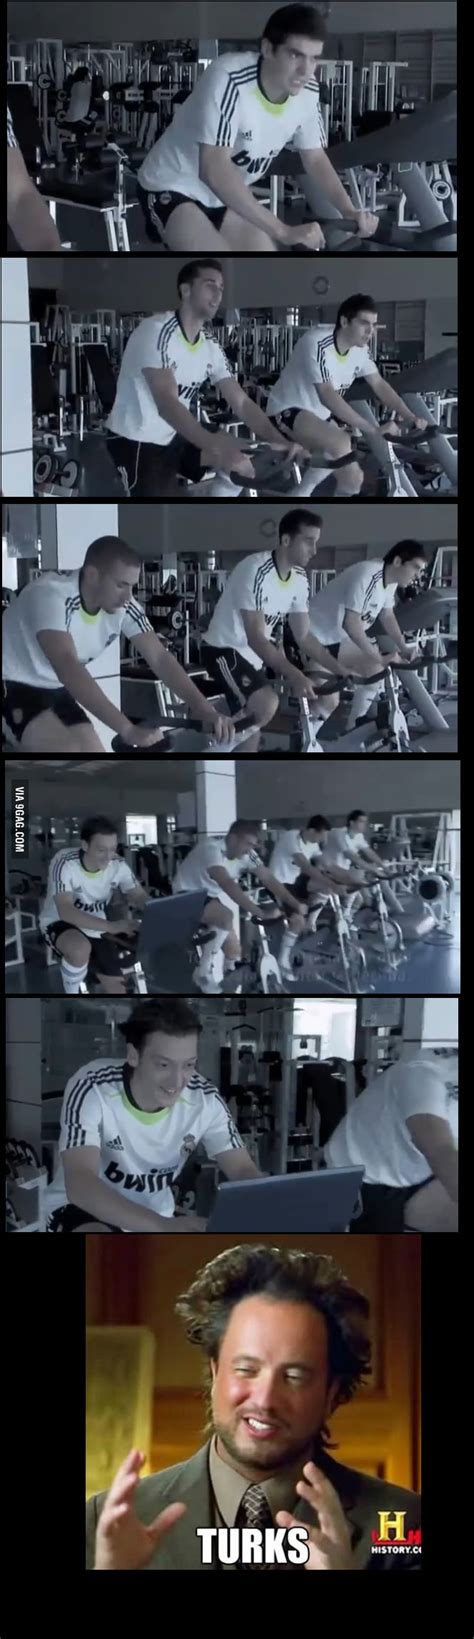 Just Another Day At Gym 9gag